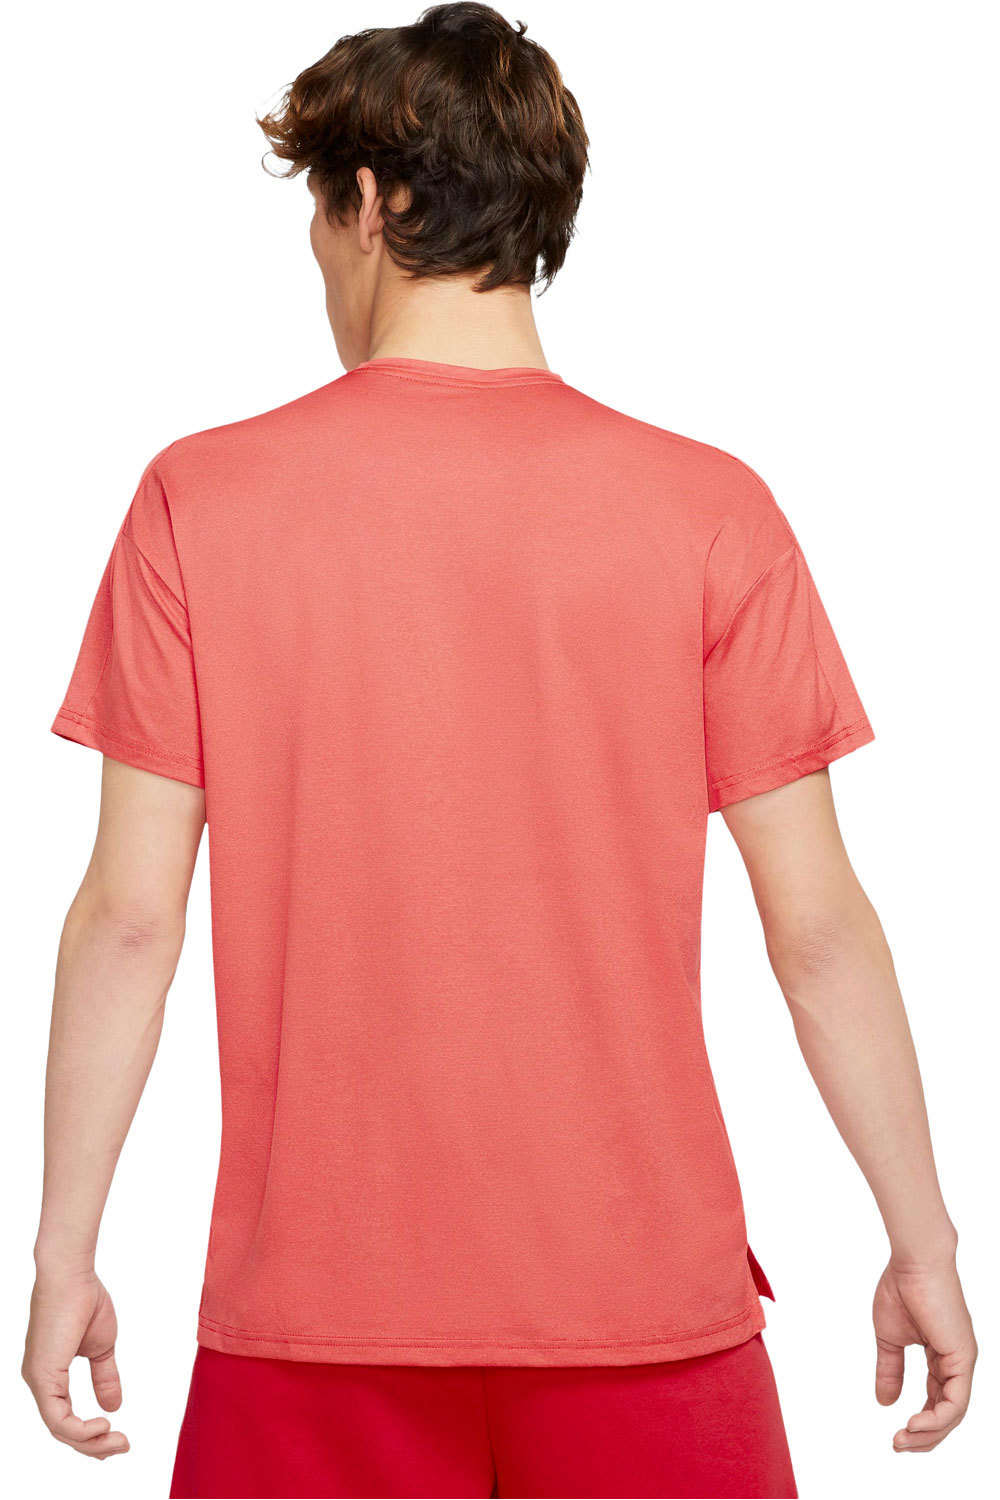 Nike camiseta fitness hombre M NP DF HPR DRY TOP SS vista trasera